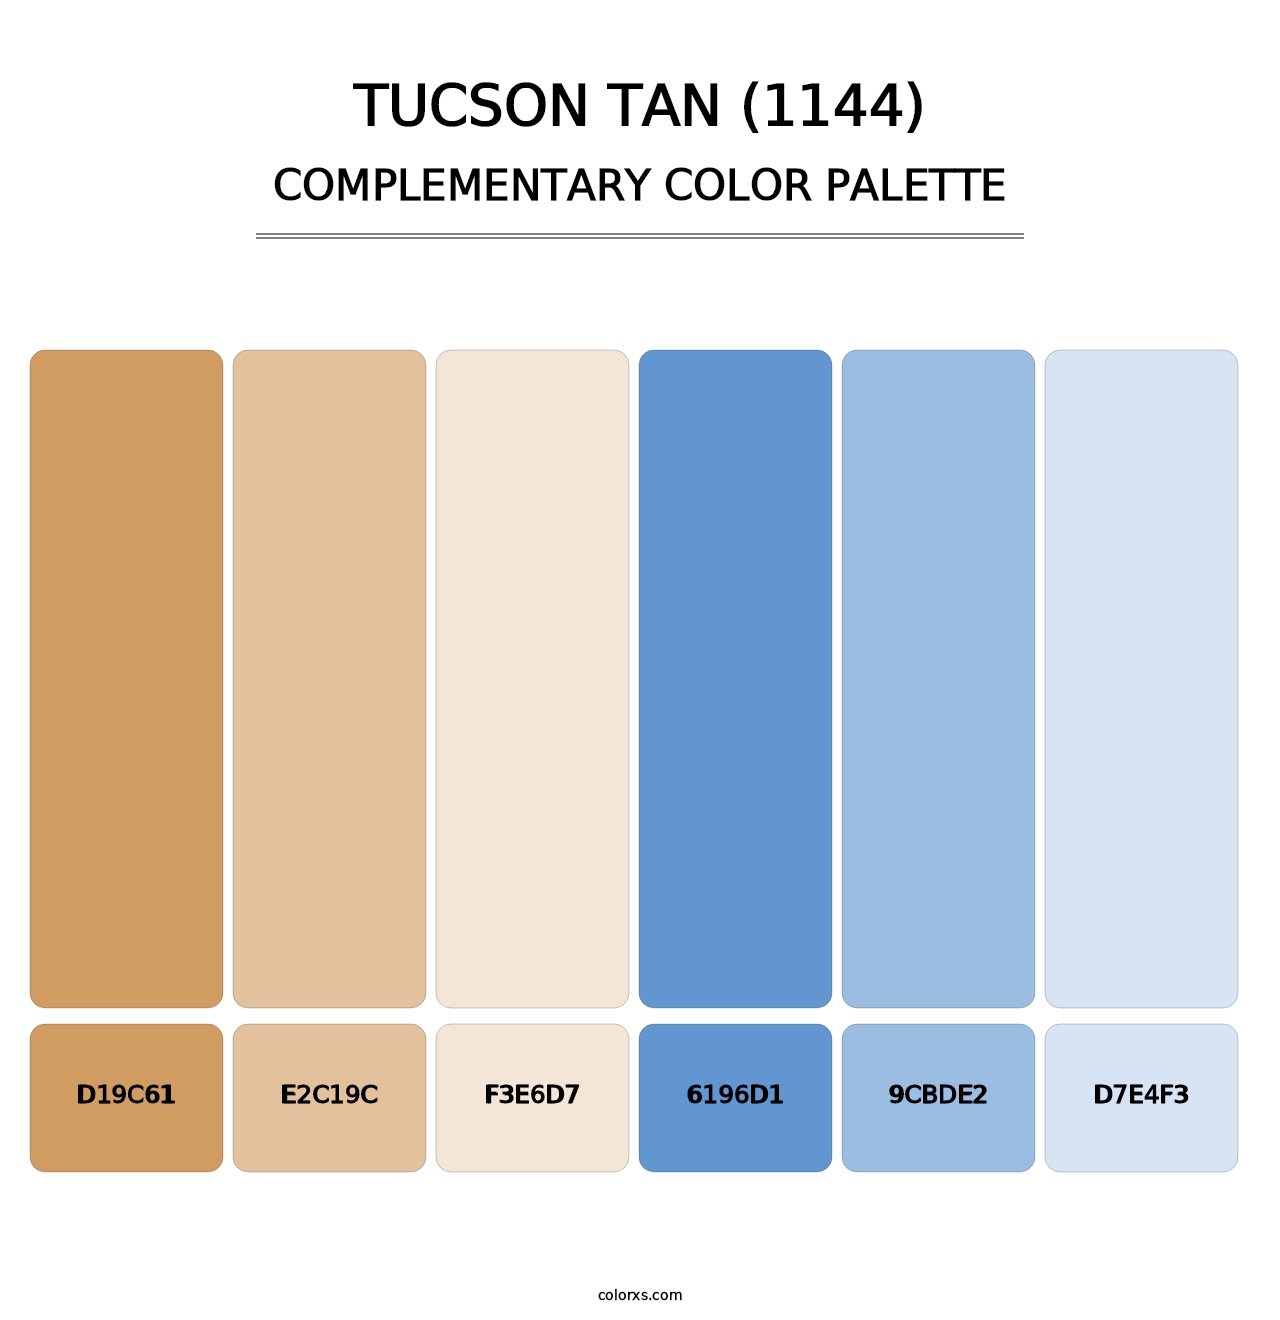 Tucson Tan (1144) - Complementary Color Palette